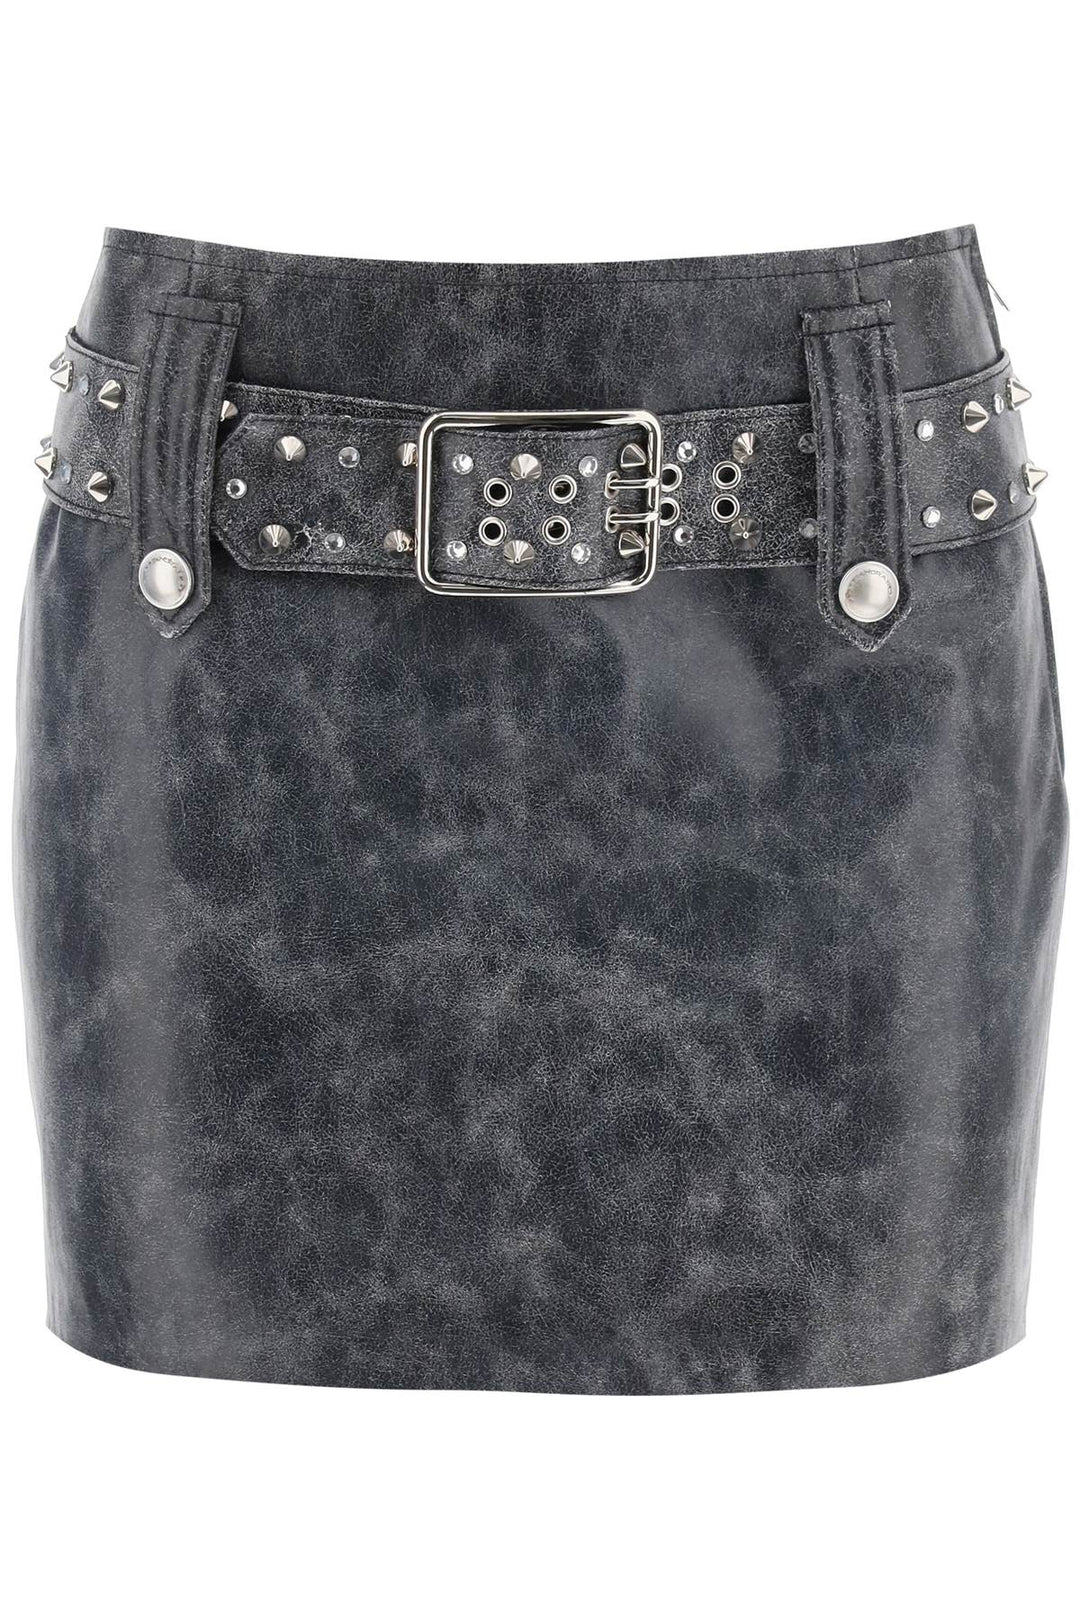 Alessandra Rich Leather Mini Skirt With Belt And Appliques   Grigio